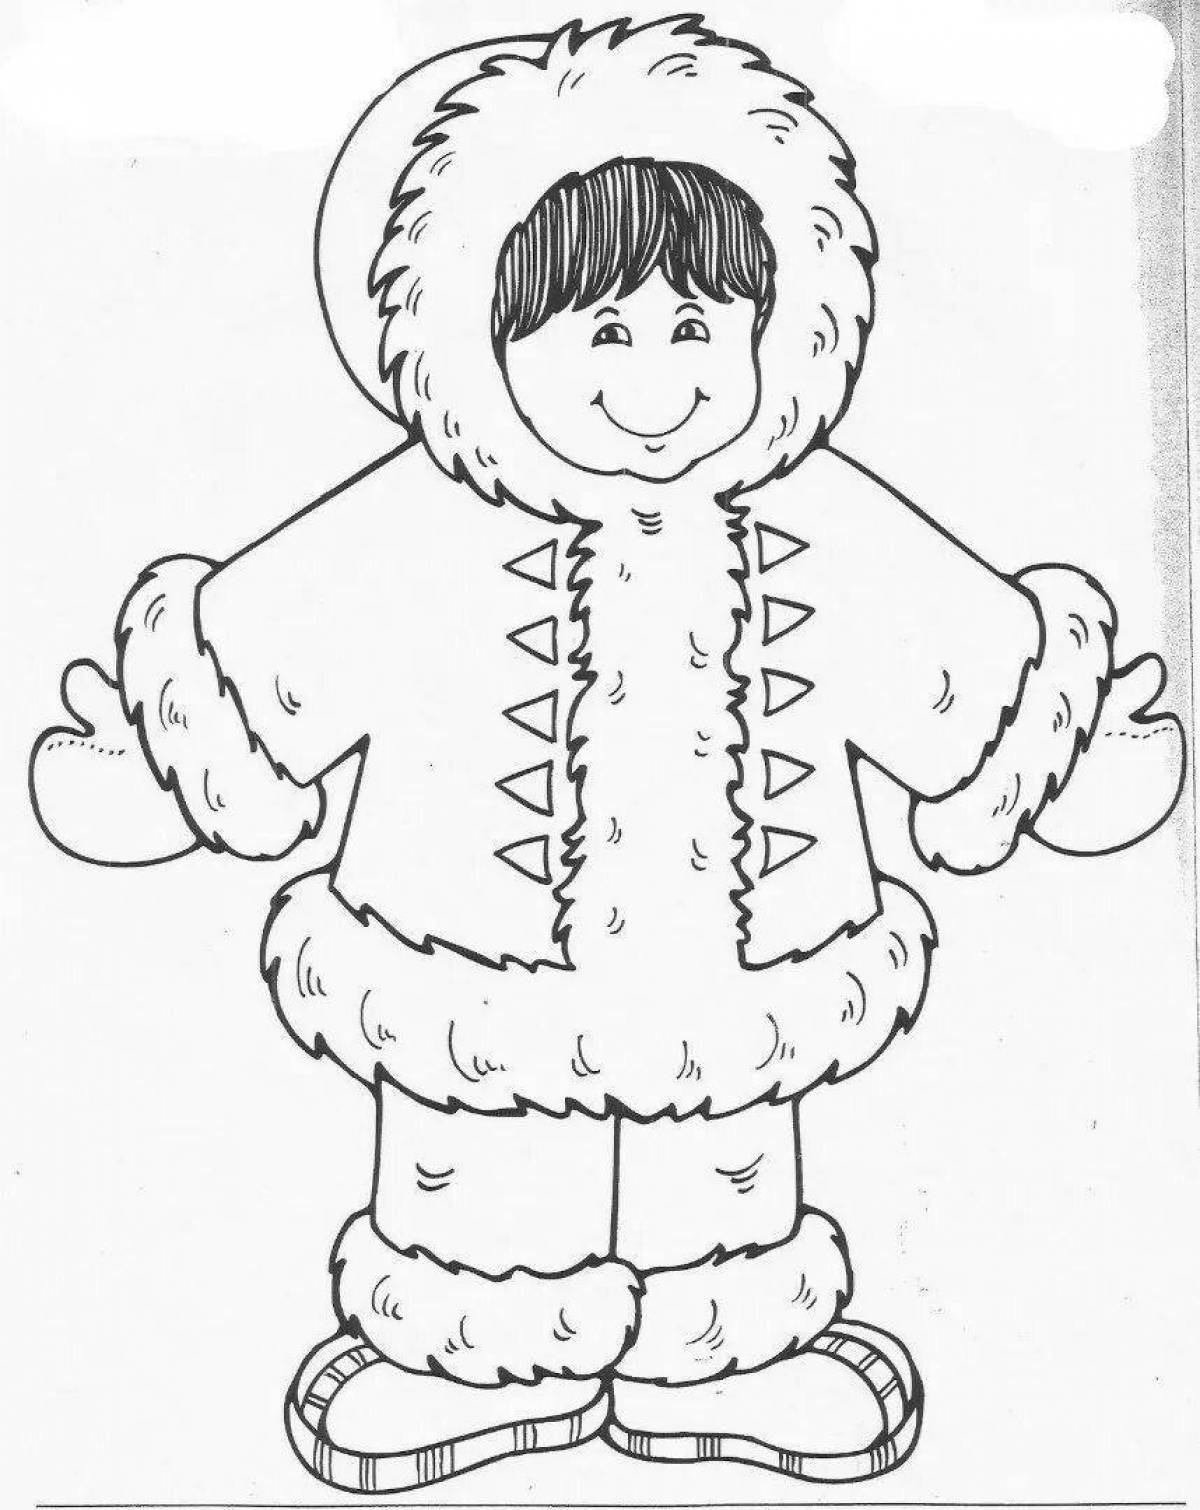 An entertaining Chukchi coloring book for beginners